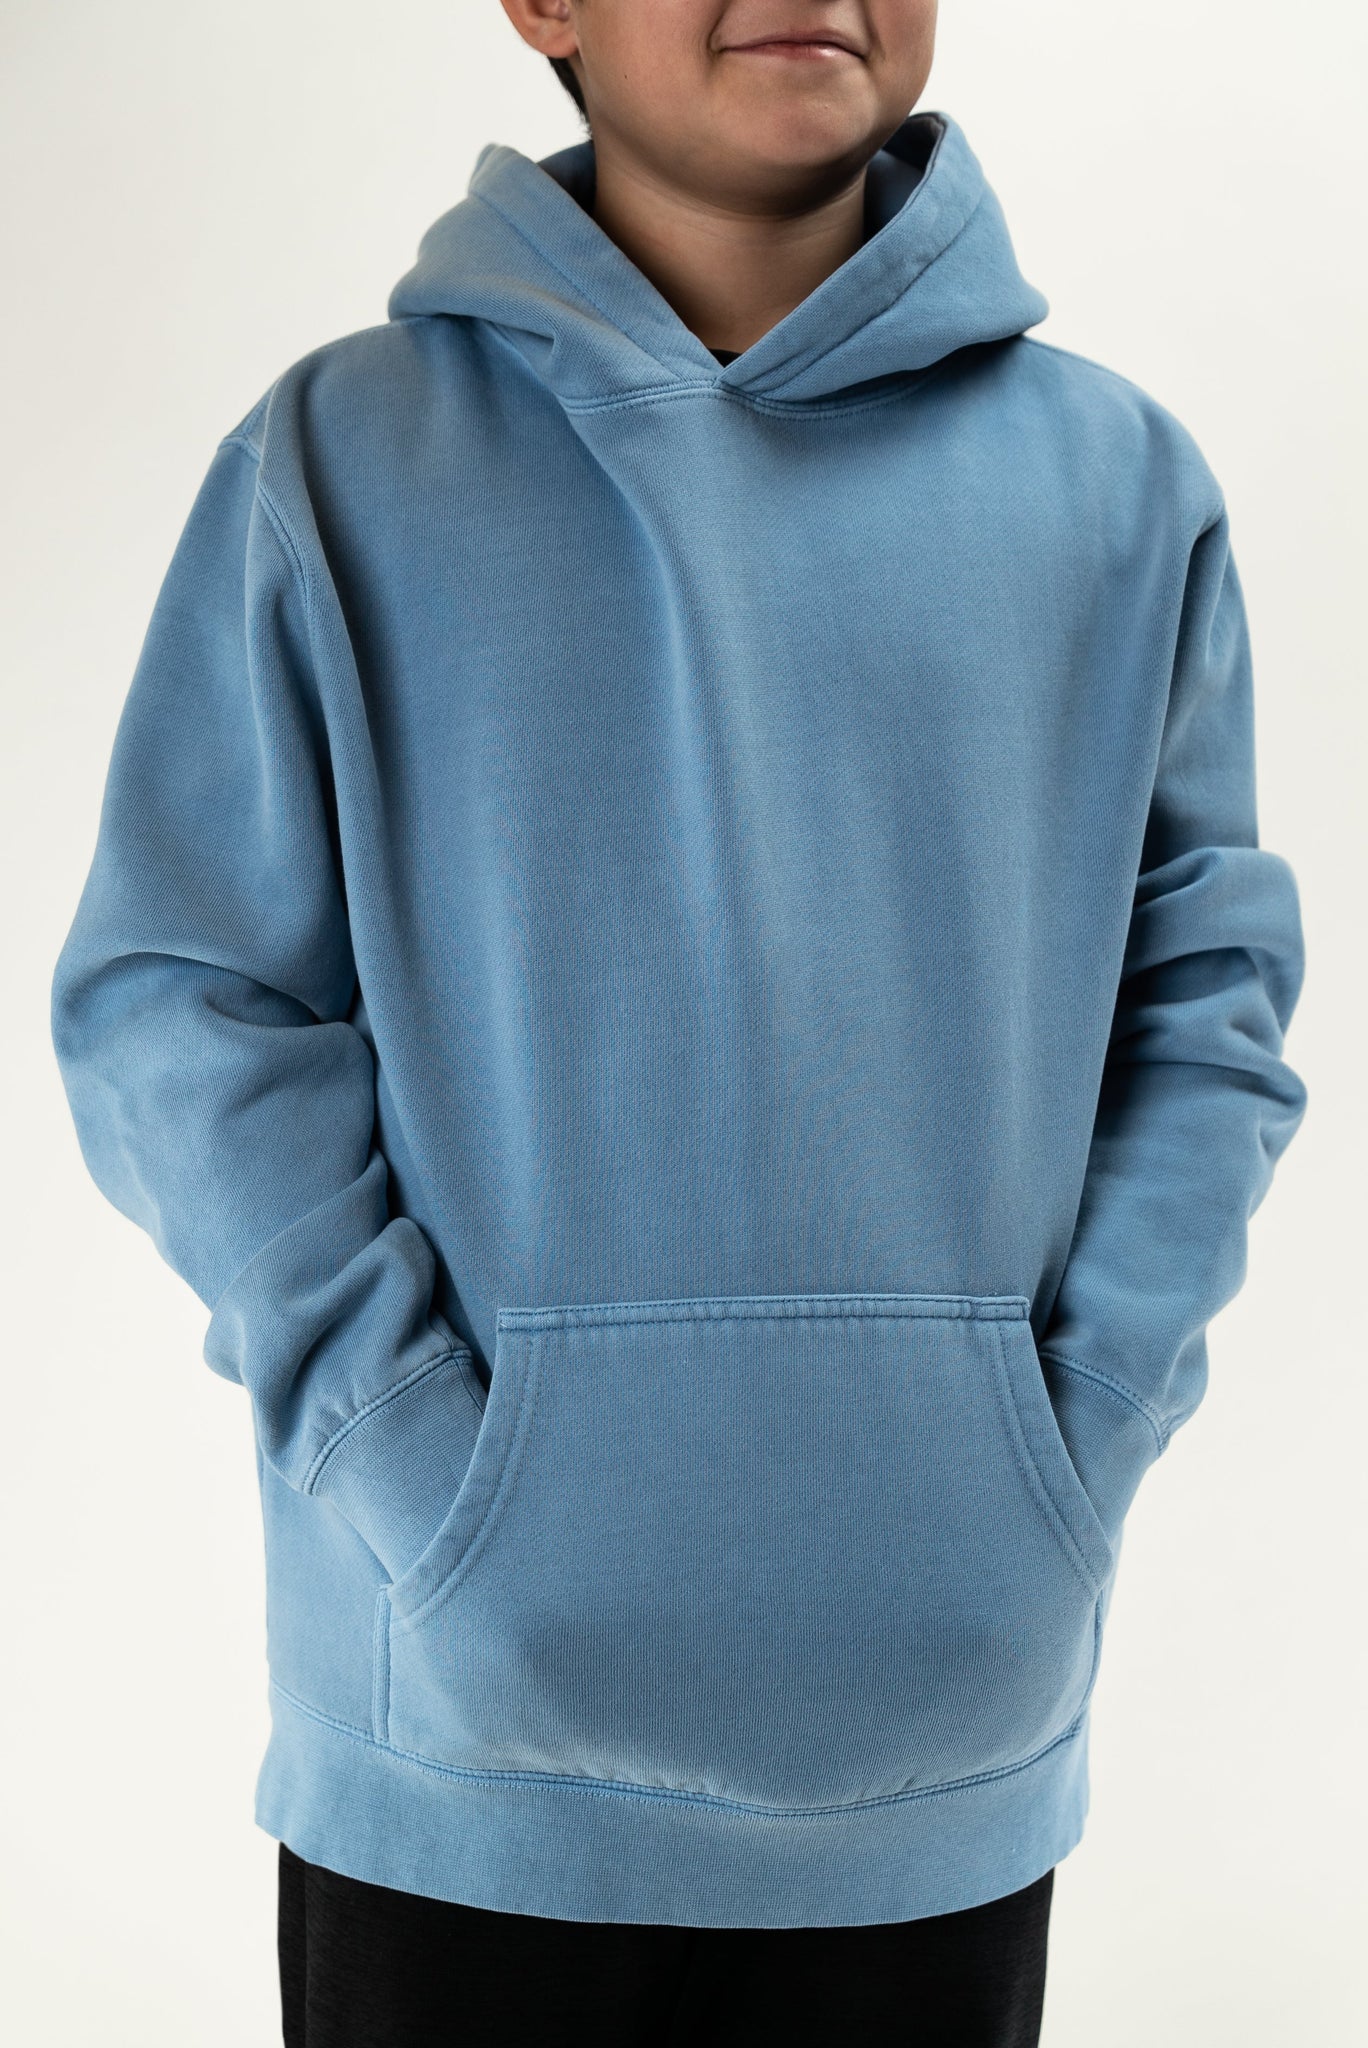 IND4001YPD - Youth Heavyweight Pigment Dye Hoodie Light